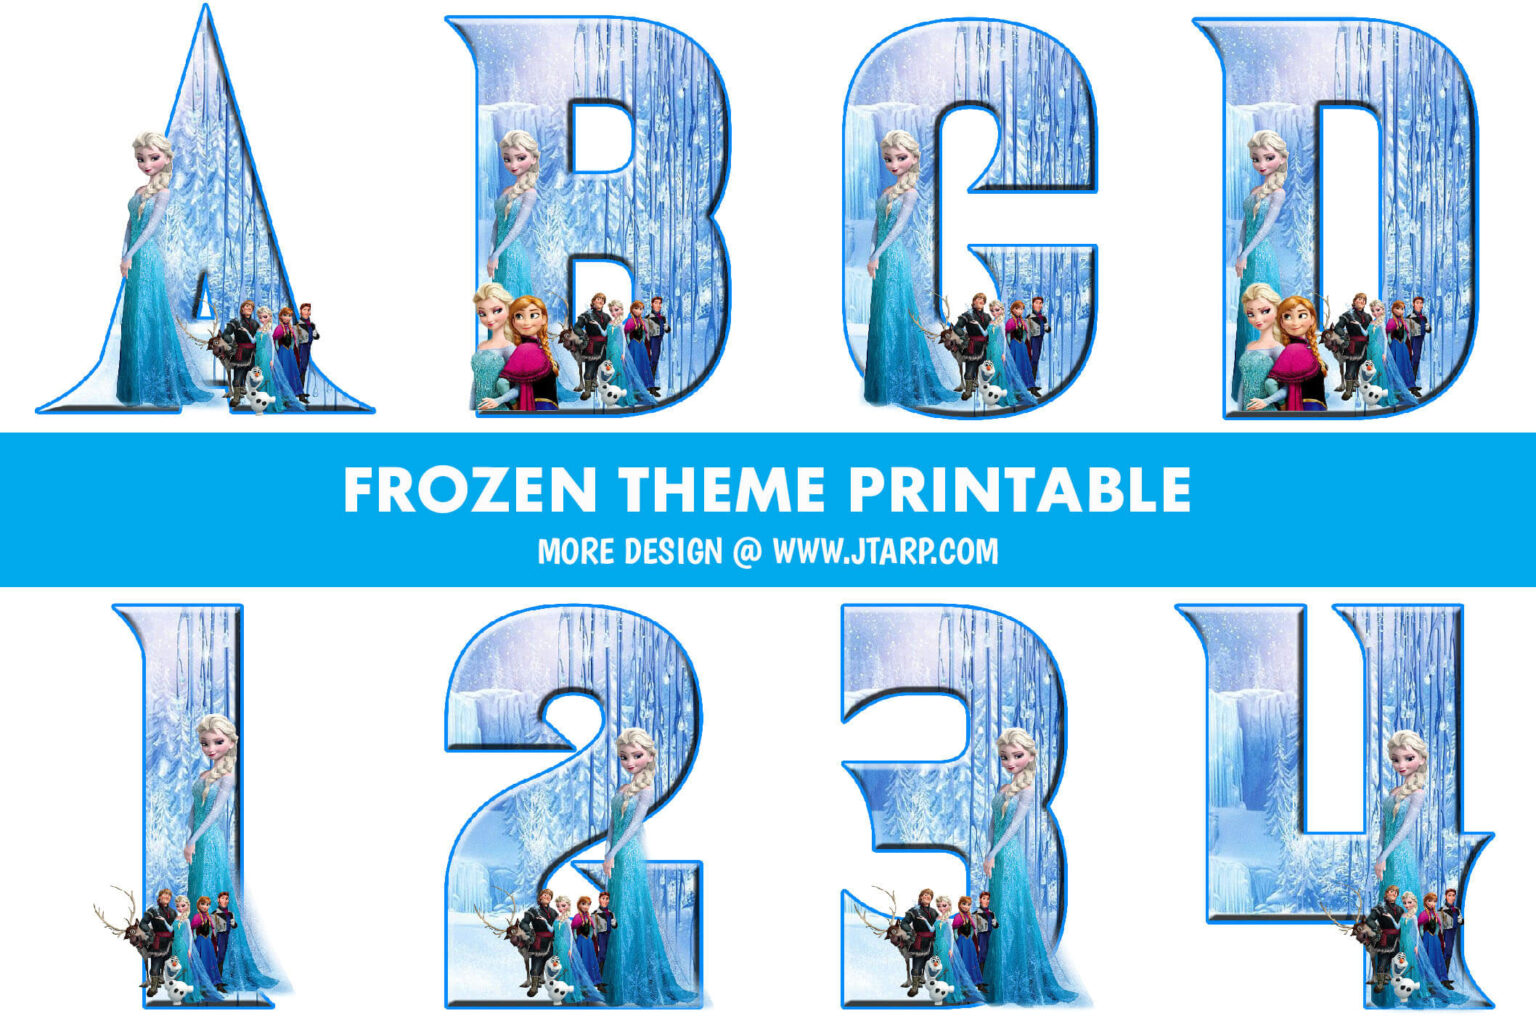 Frozen Theme Printable Letters and Numbers Thumbnail